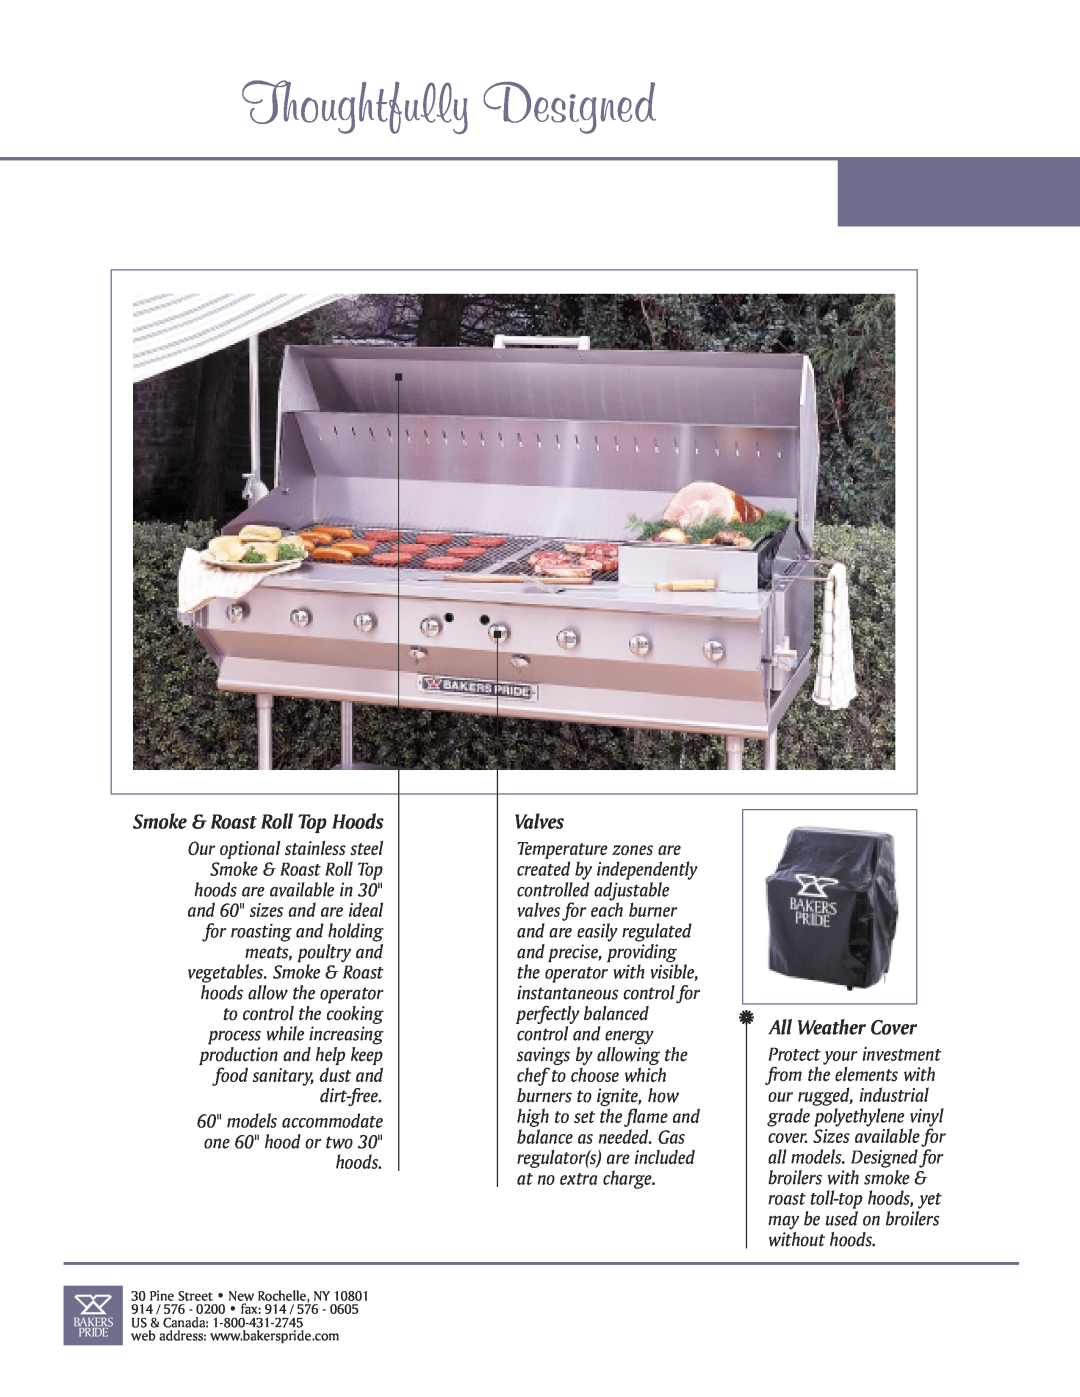 Bakers Pride Oven CBBQ-30-BI, CBBQ-60-BI Thoughtfully Designed, Smoke & Roast Roll Top Hoods, Valves, All Weather Cover 